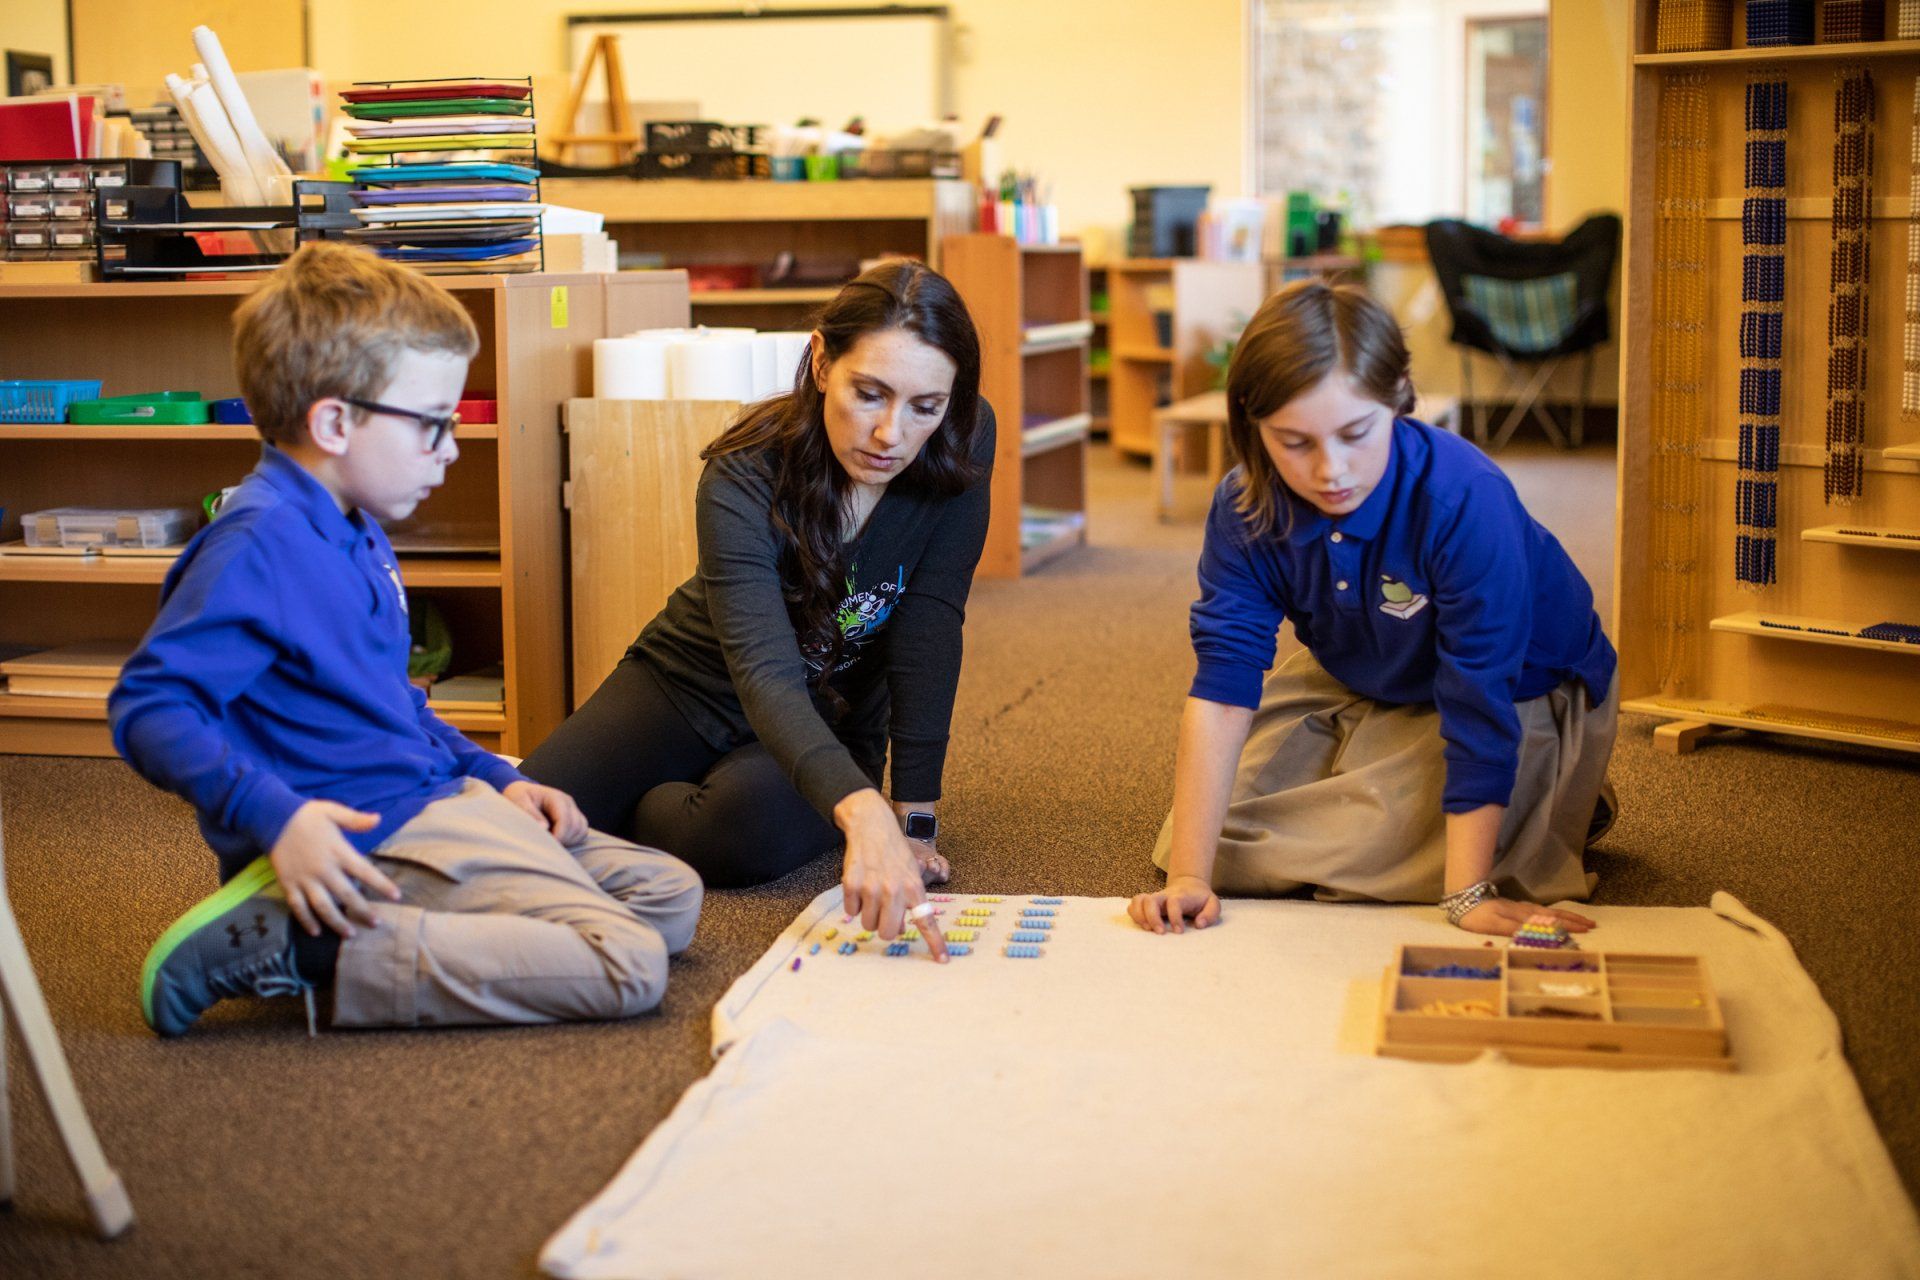 Montessori guide working with students